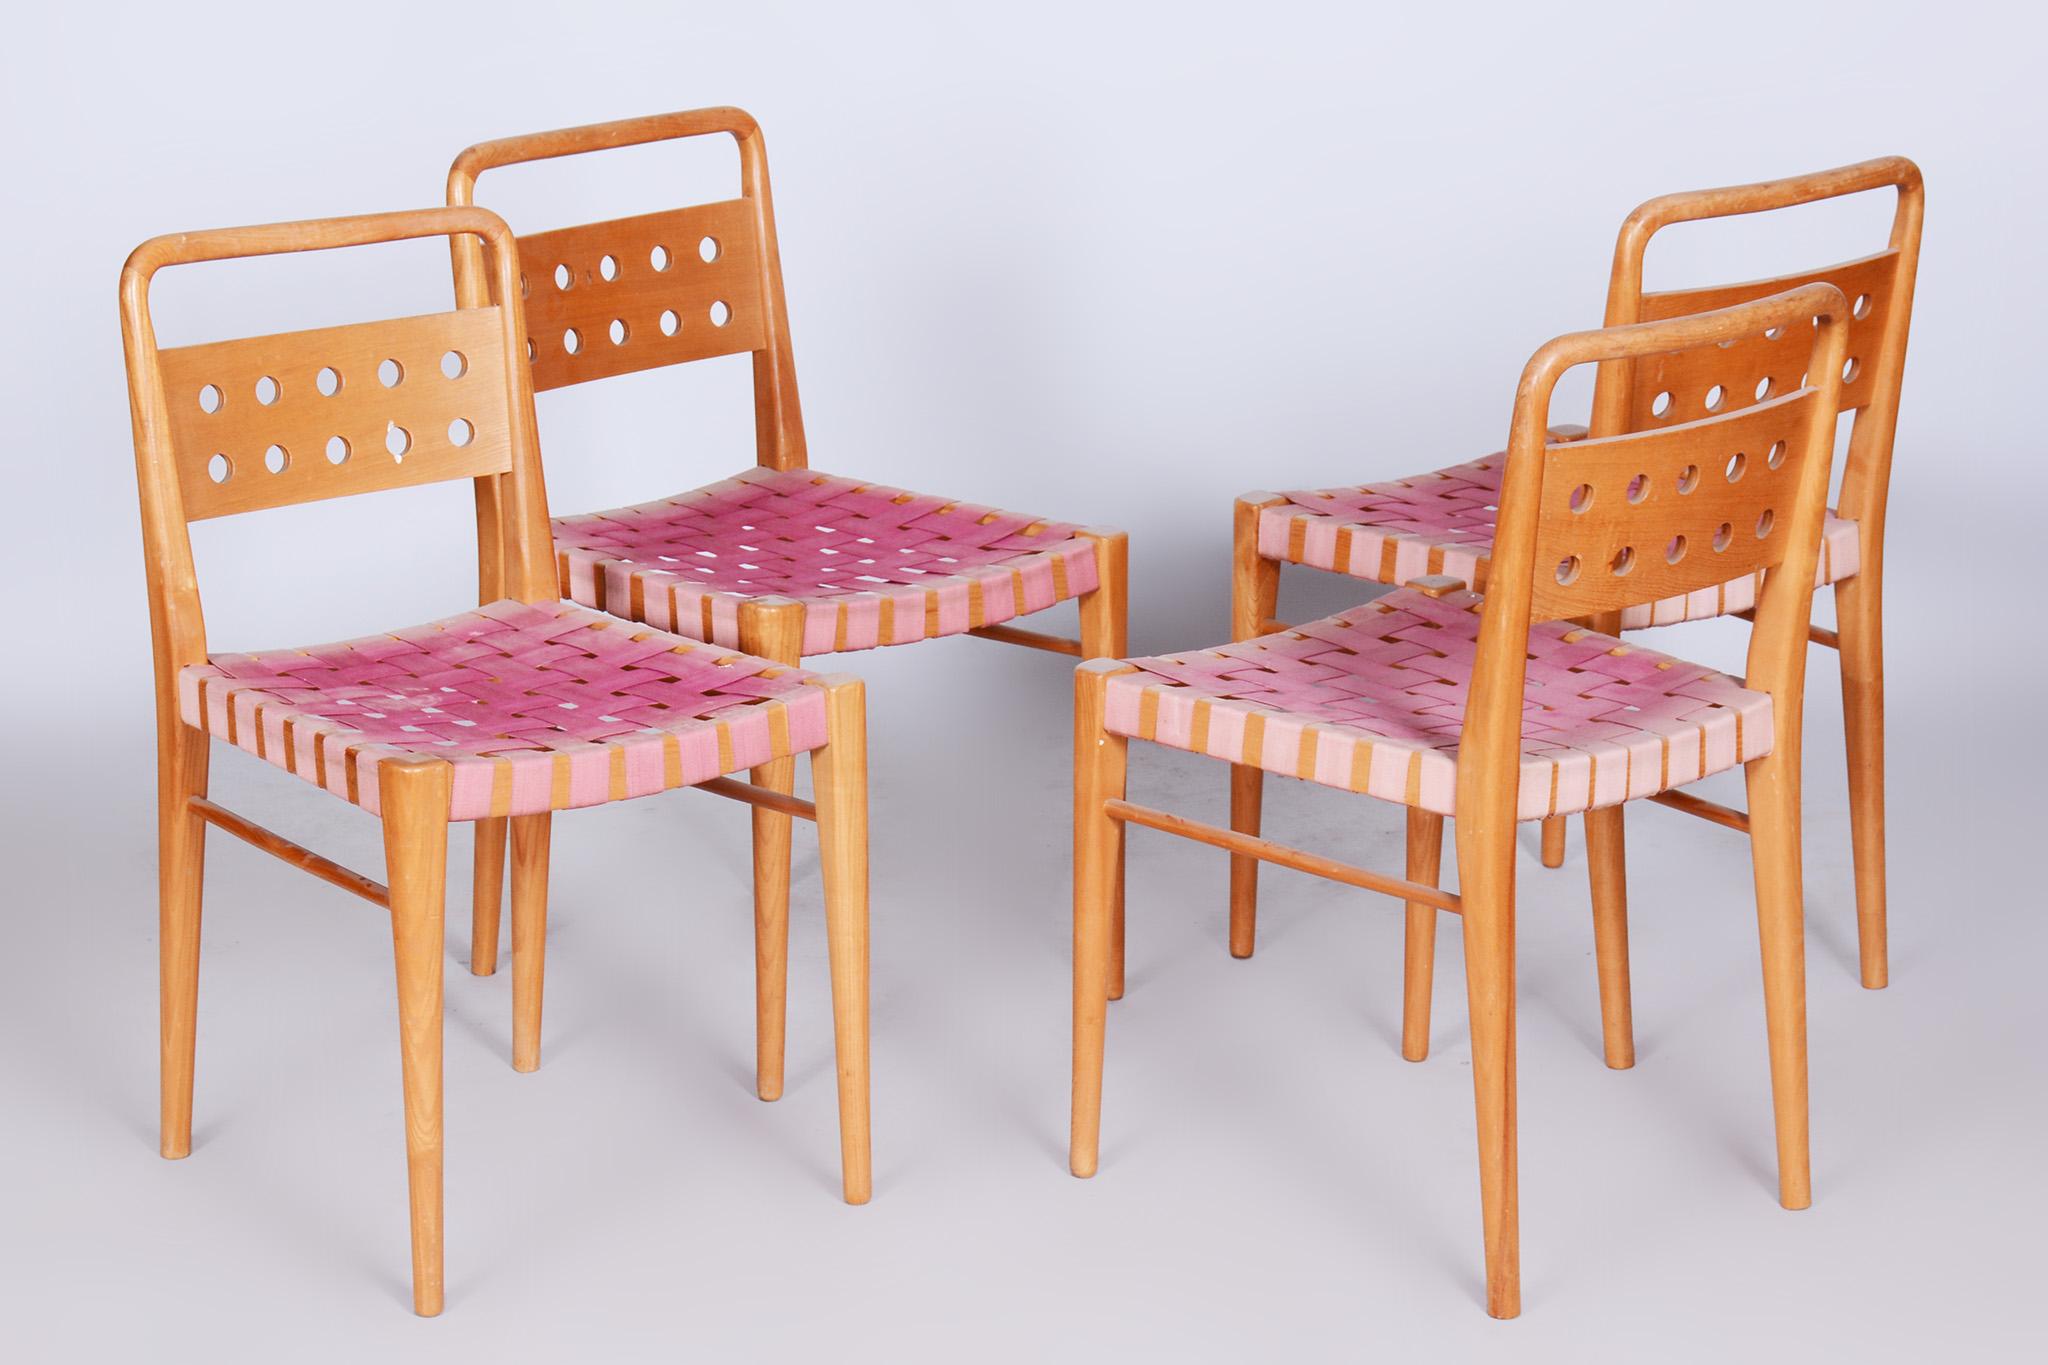 20th Century Set of Four Midcentury Ash Dining Chairs, Original Condition, Czechia, 1950s For Sale